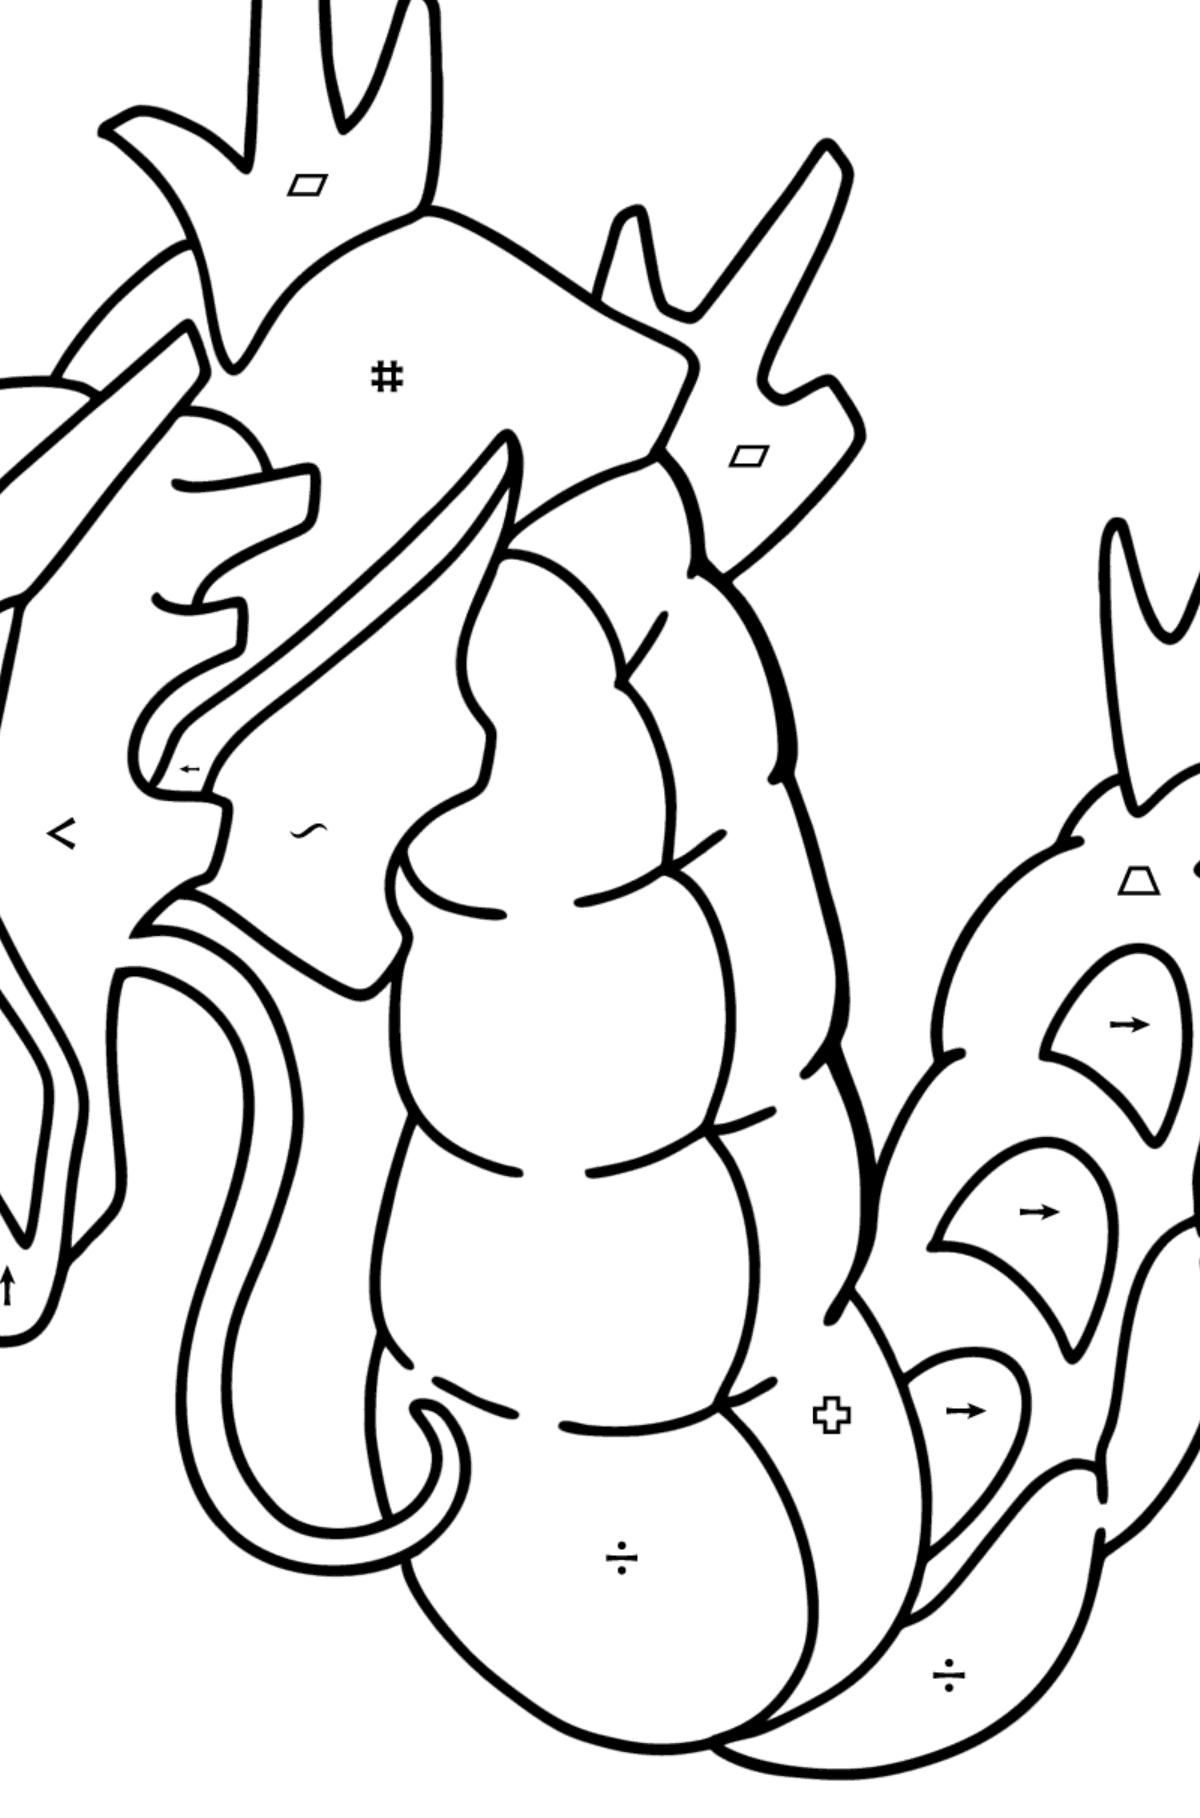 Coloring page Pokemon Go Gyarados - Coloring by Symbols and Geometric Shapes for Kids